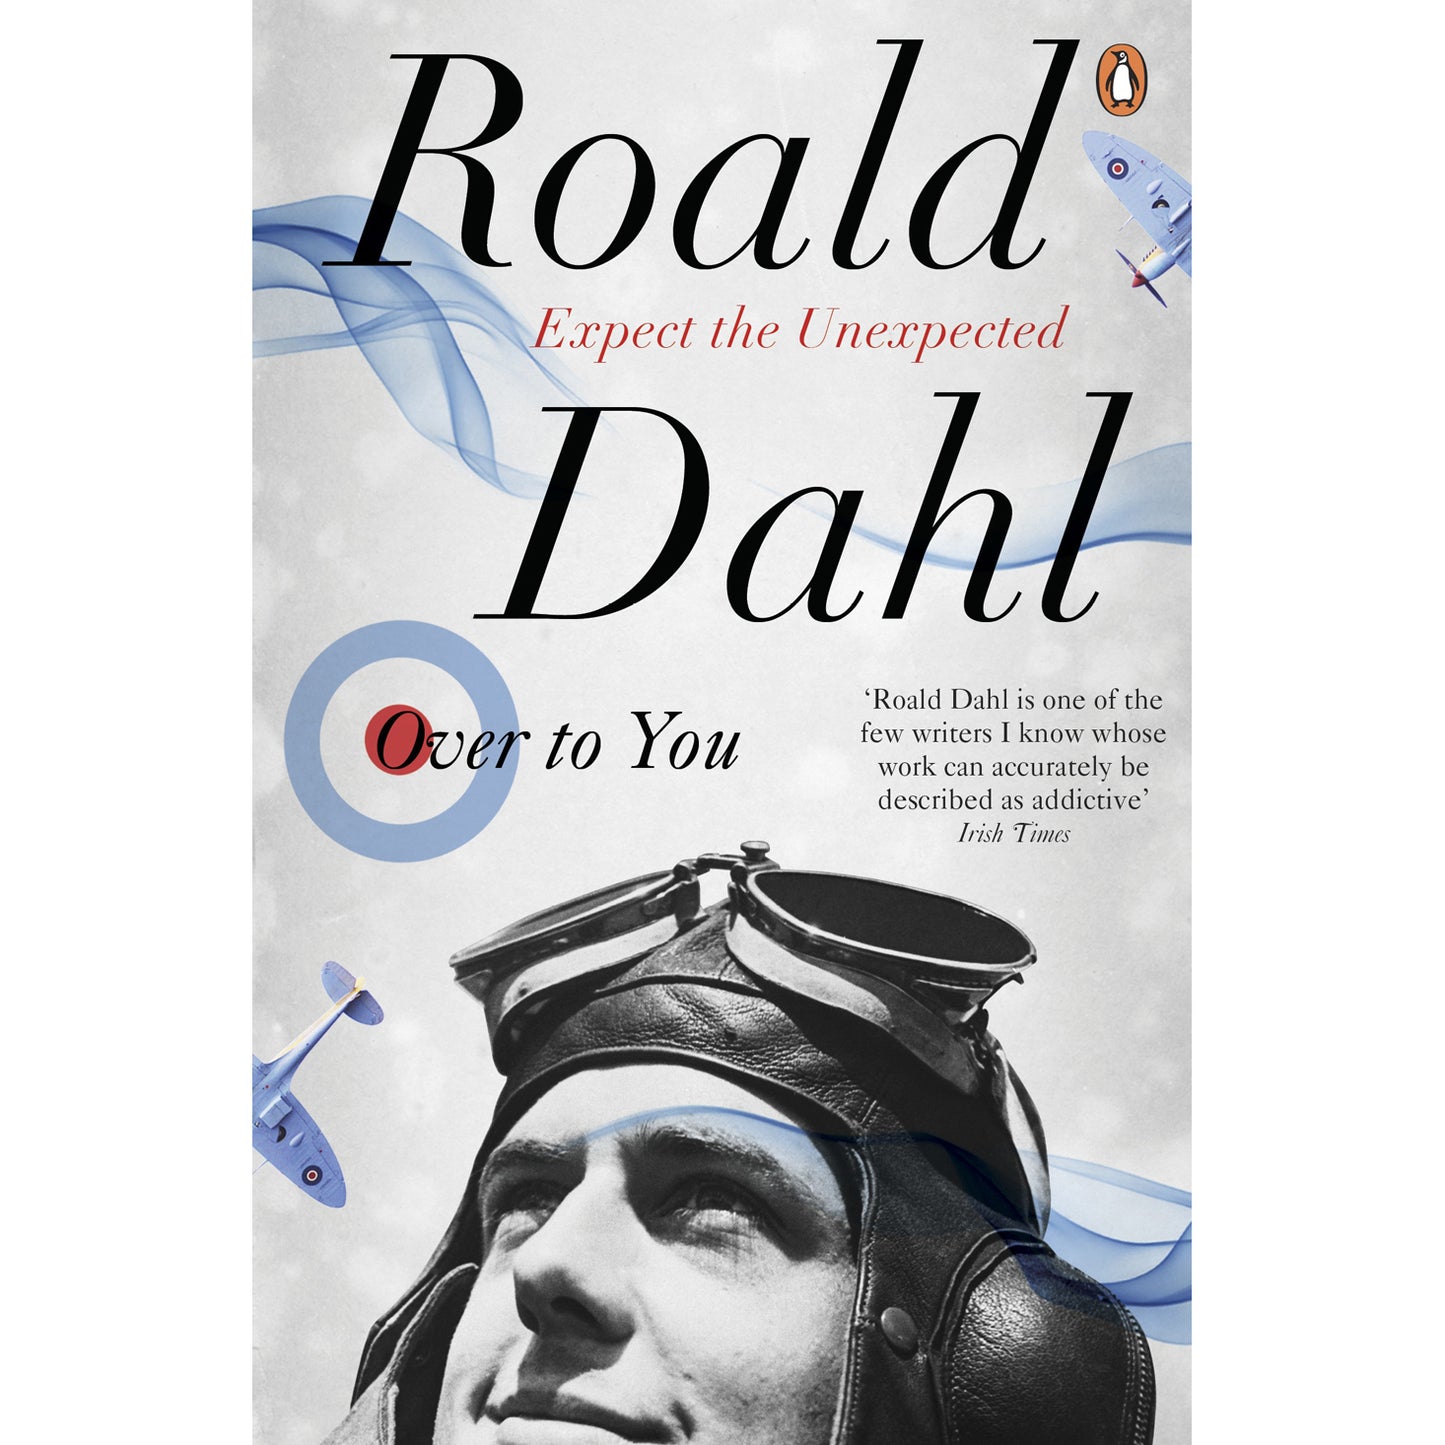 Over To You by Roald Dahl